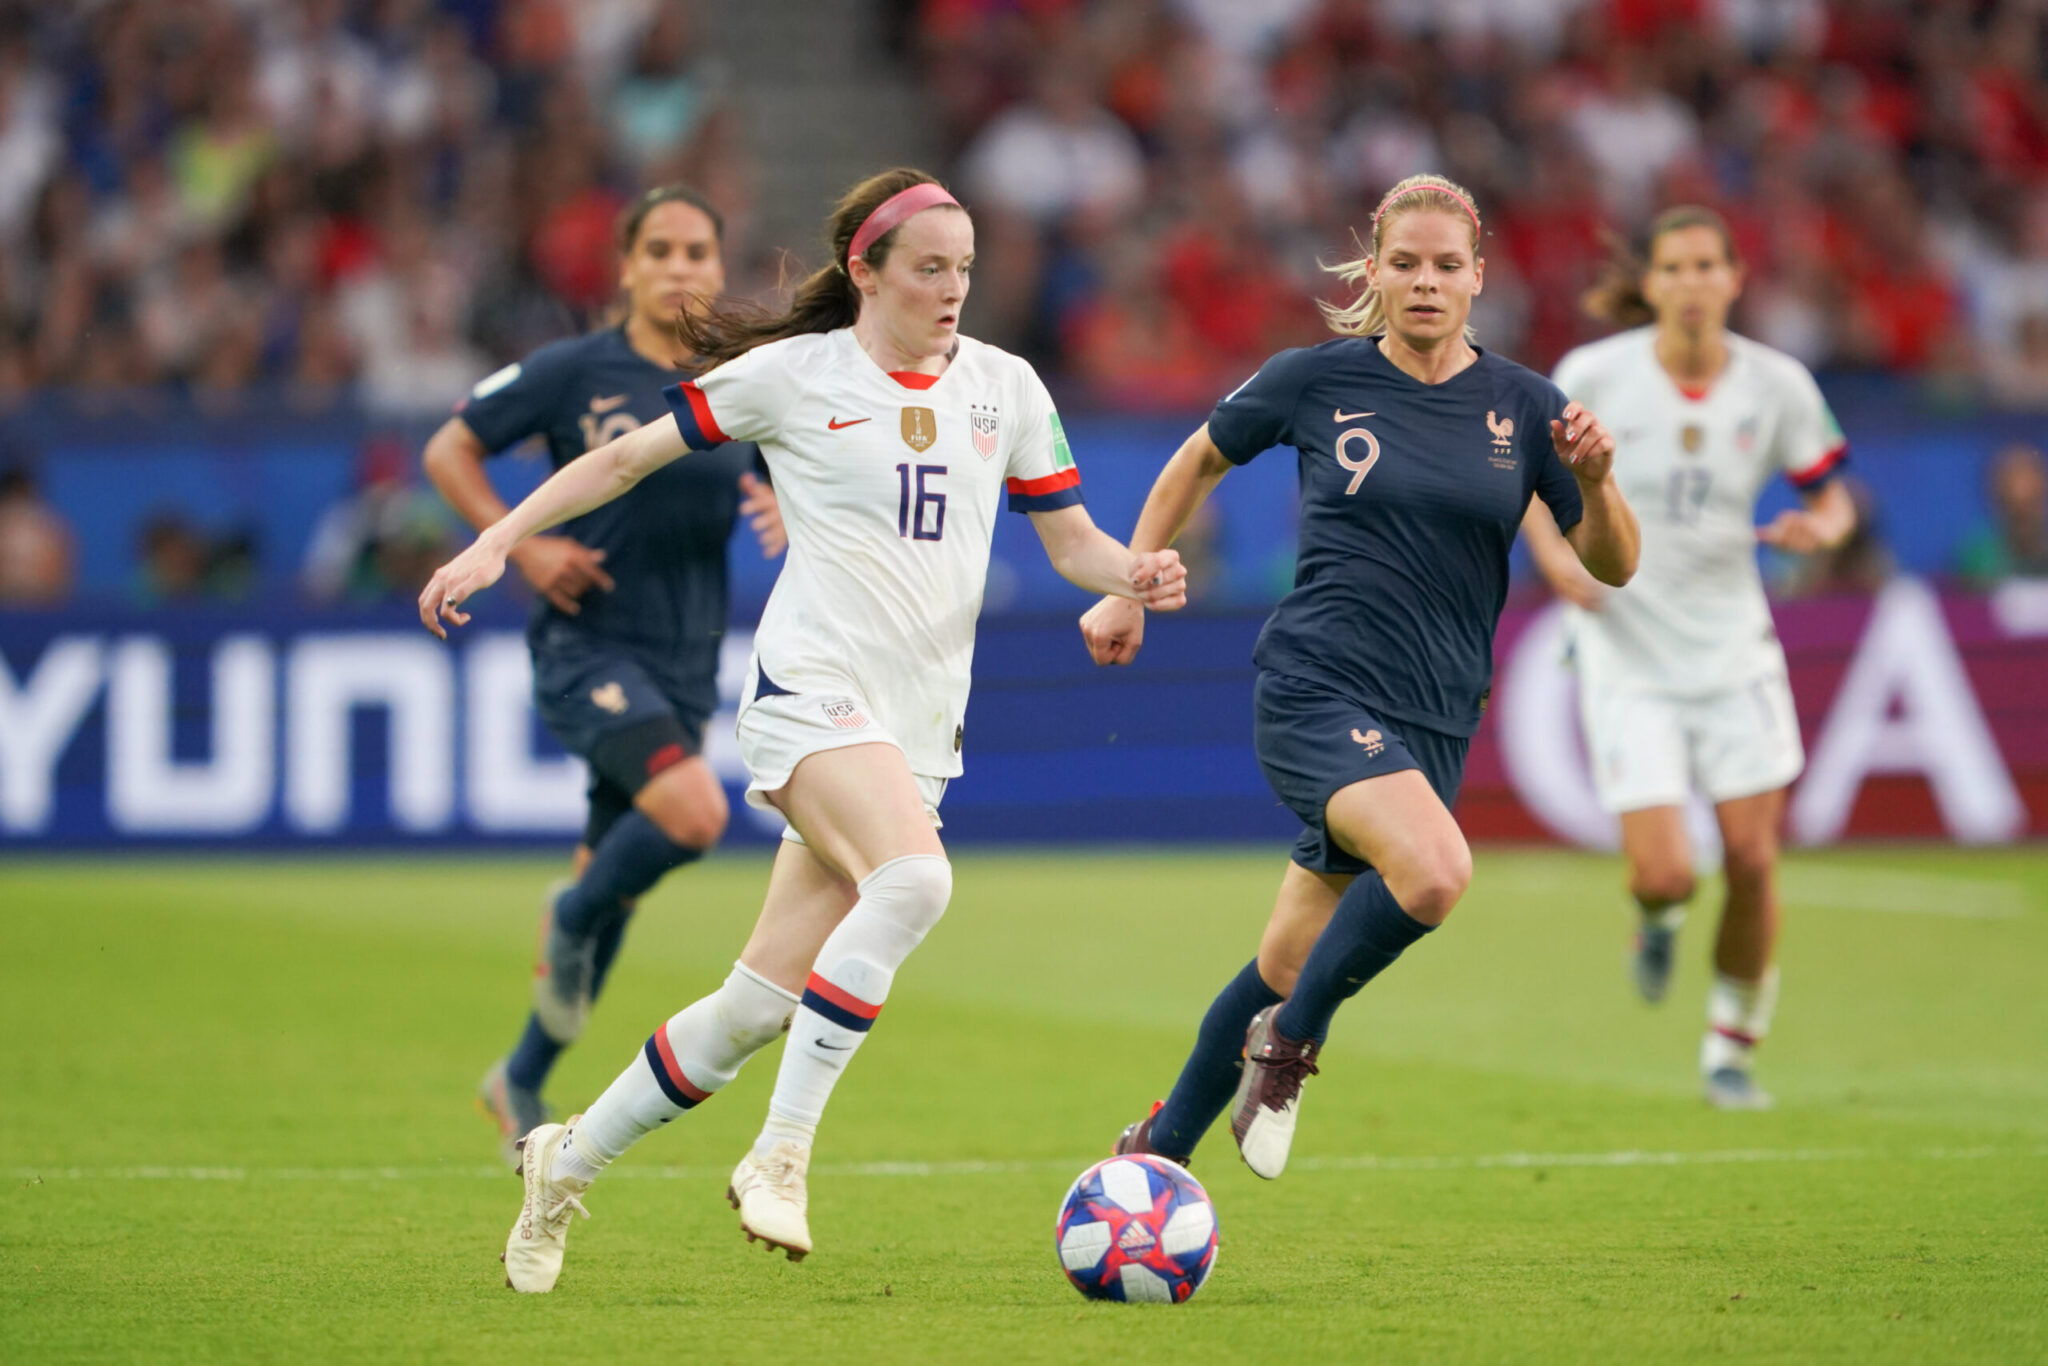 Lavelle earns fourth start as US bests France Featured Image